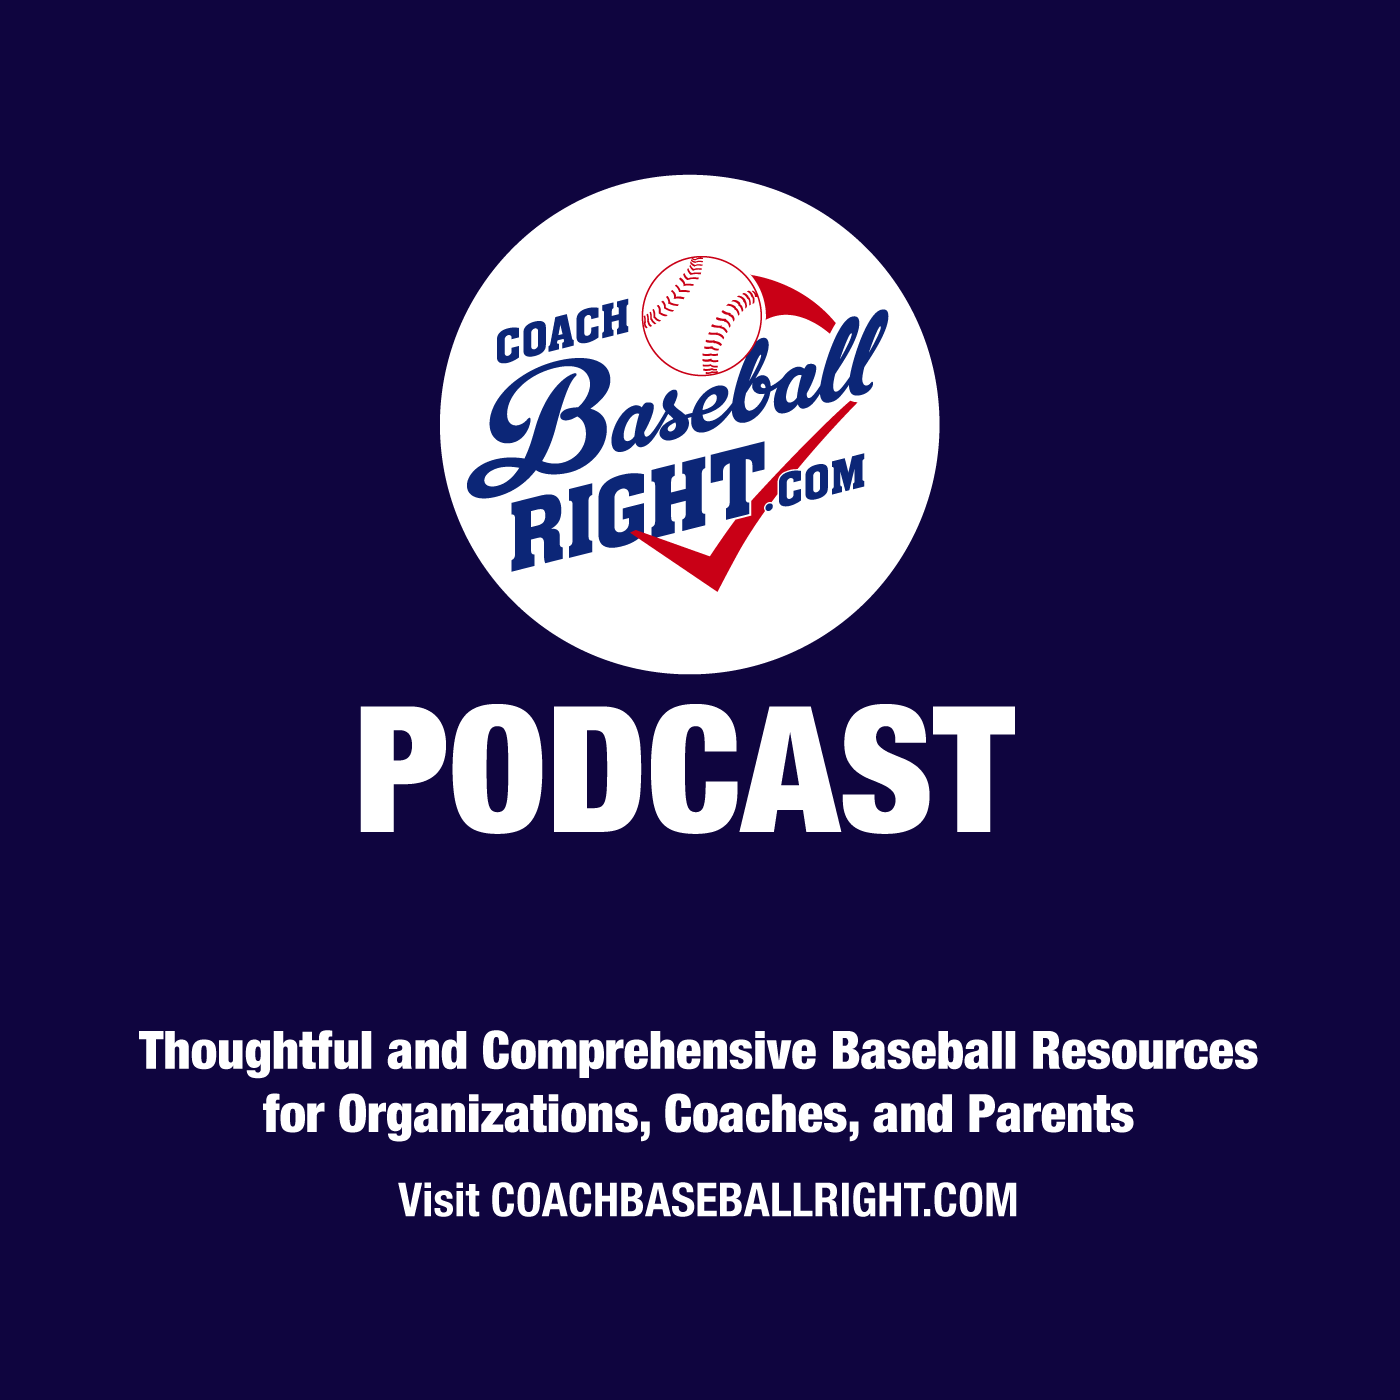 Episode 1: Welcome to the Coach Baseball Right Podcast